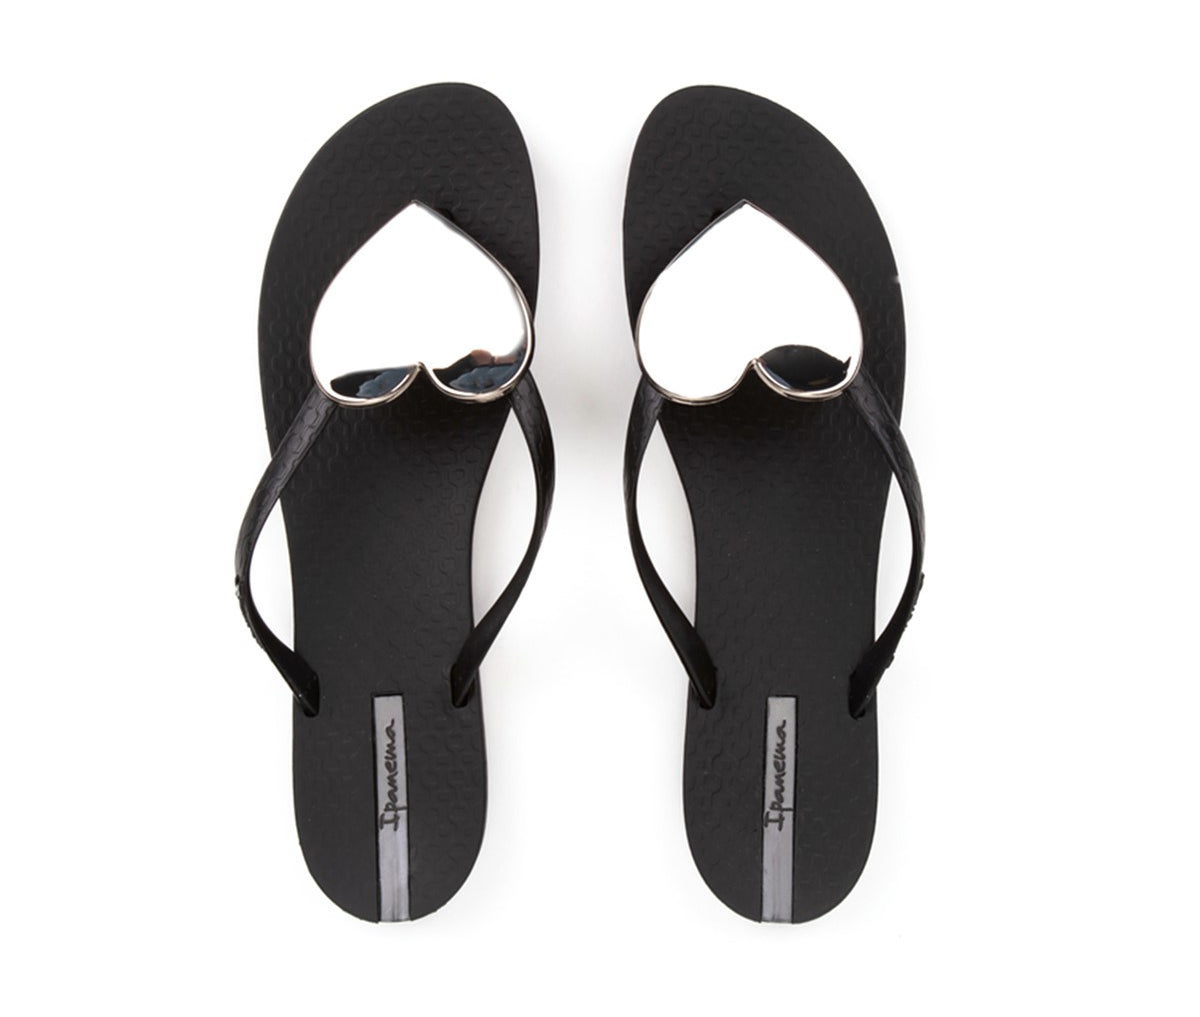 Top view of a pair of black Ipanema Wave Heart flip flops with a silver heart.